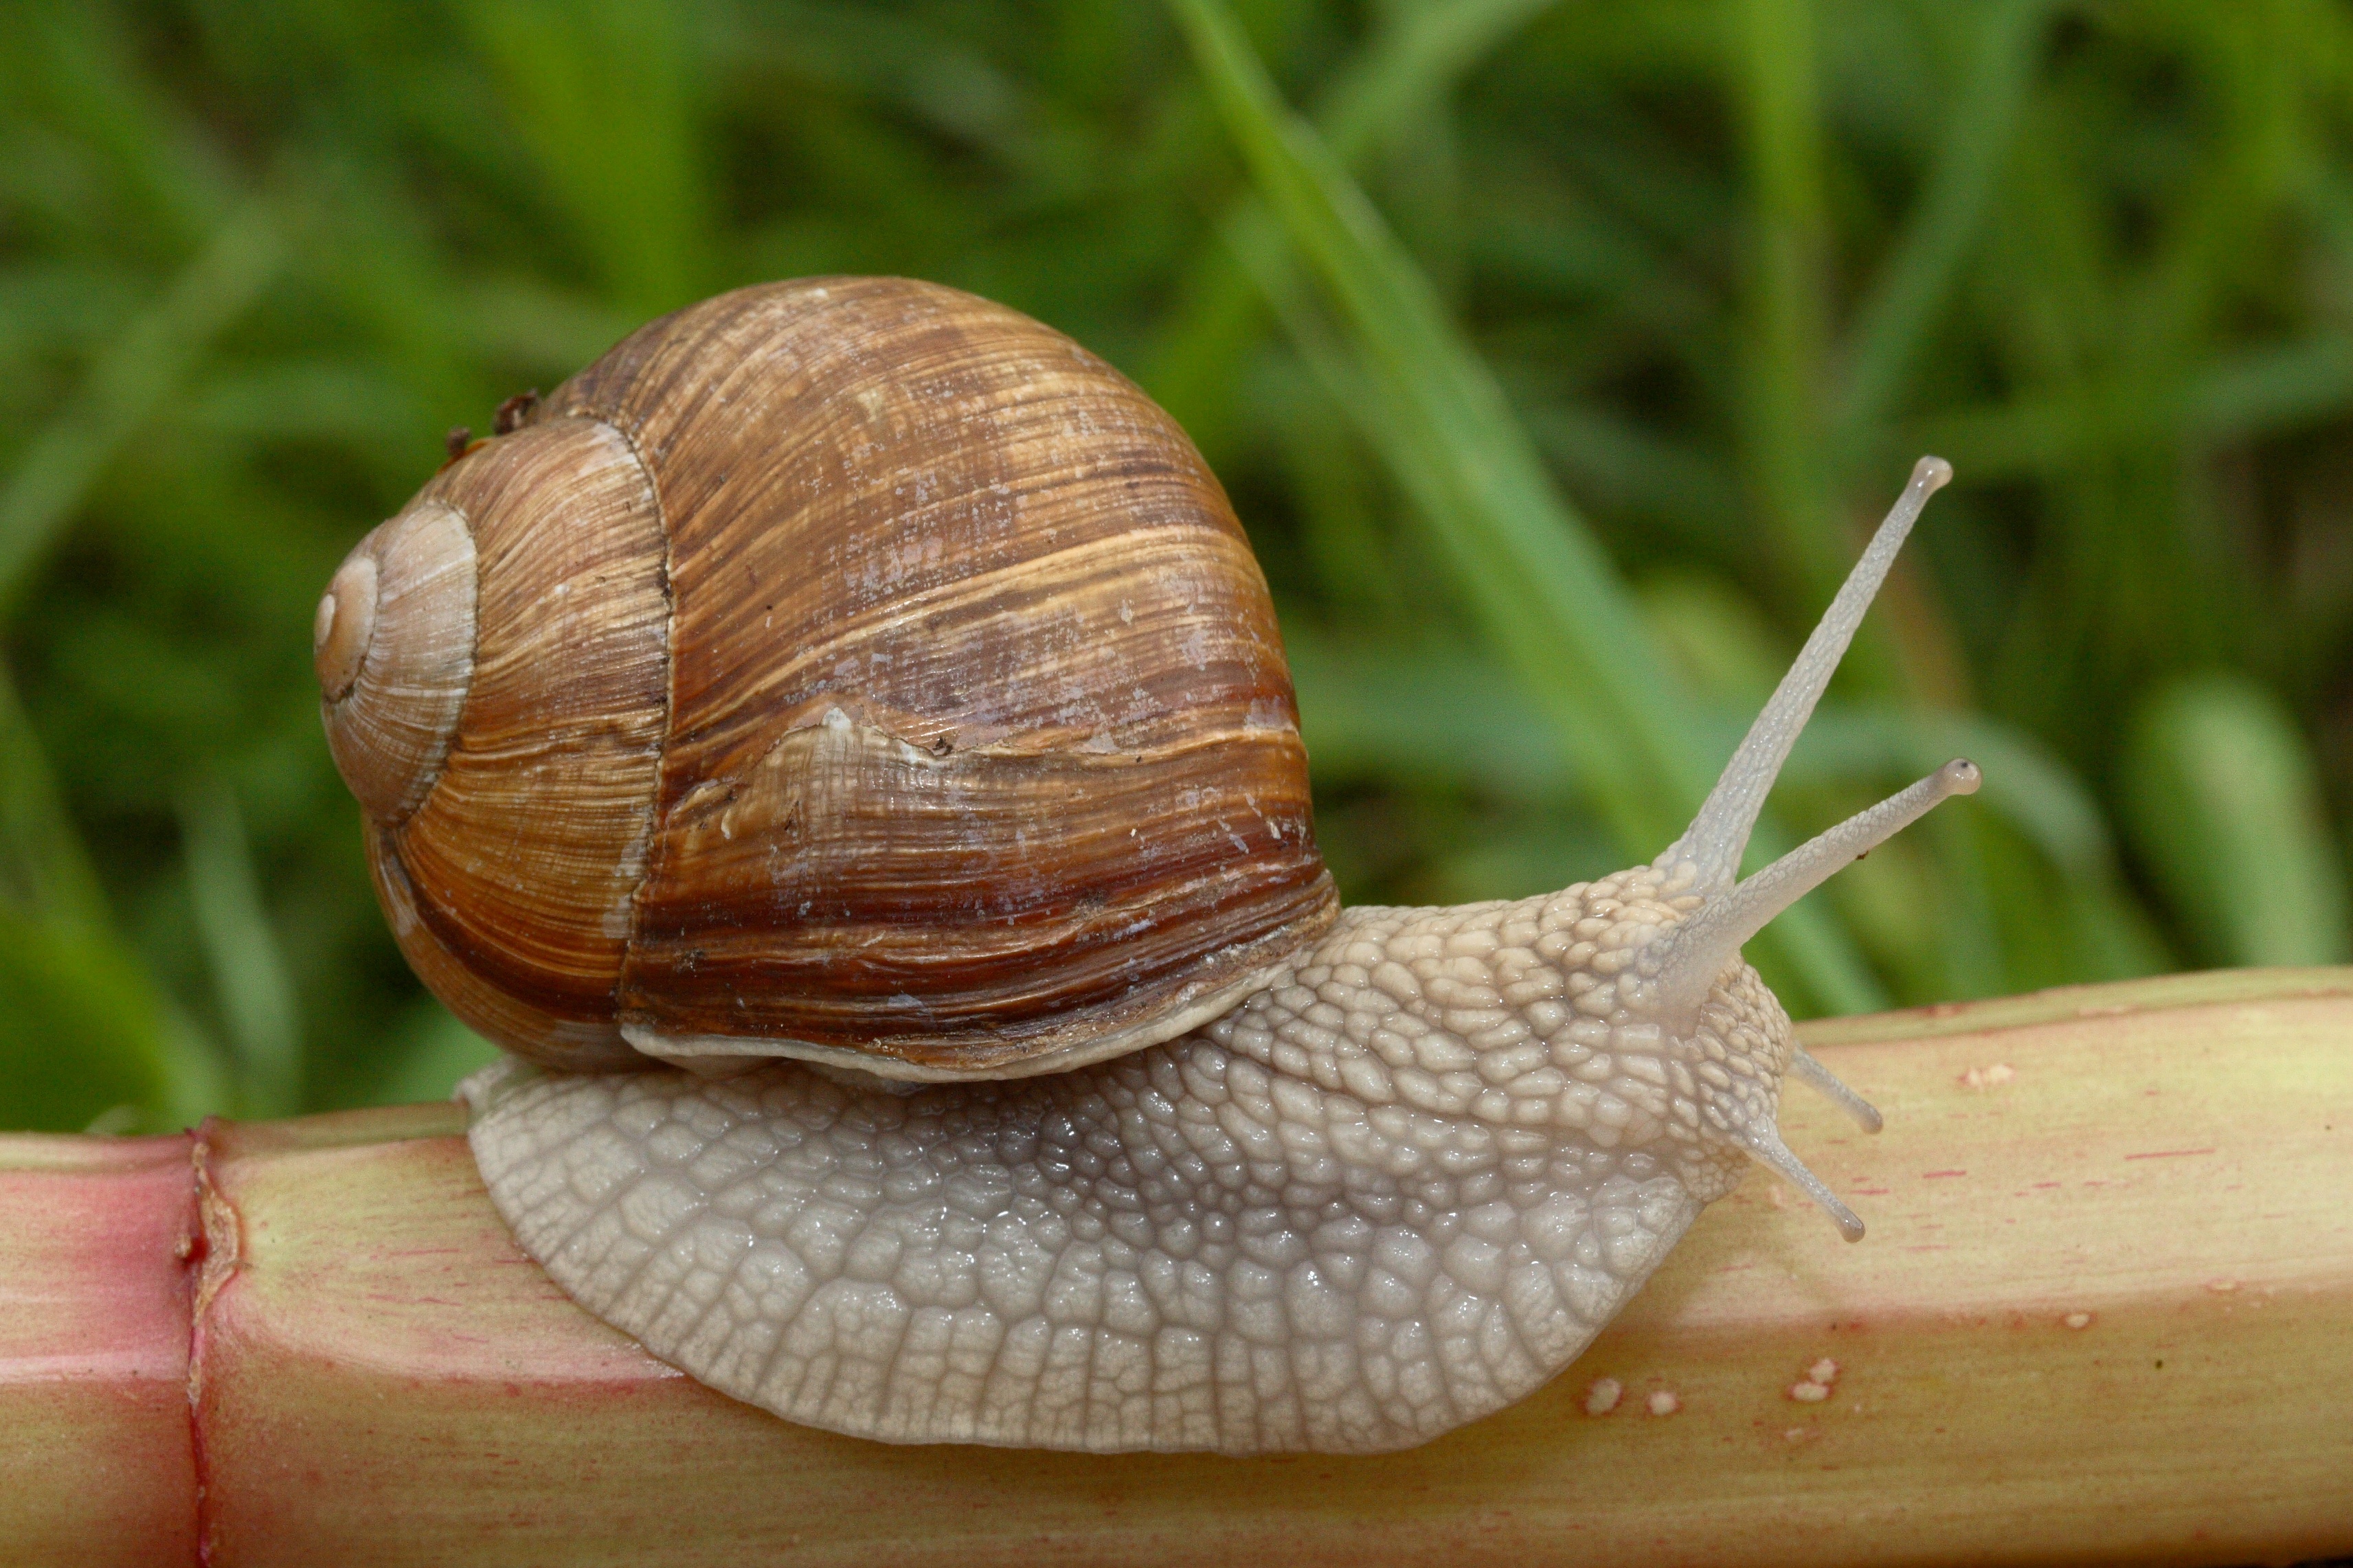 What is the maximum temperature that snails can survive?